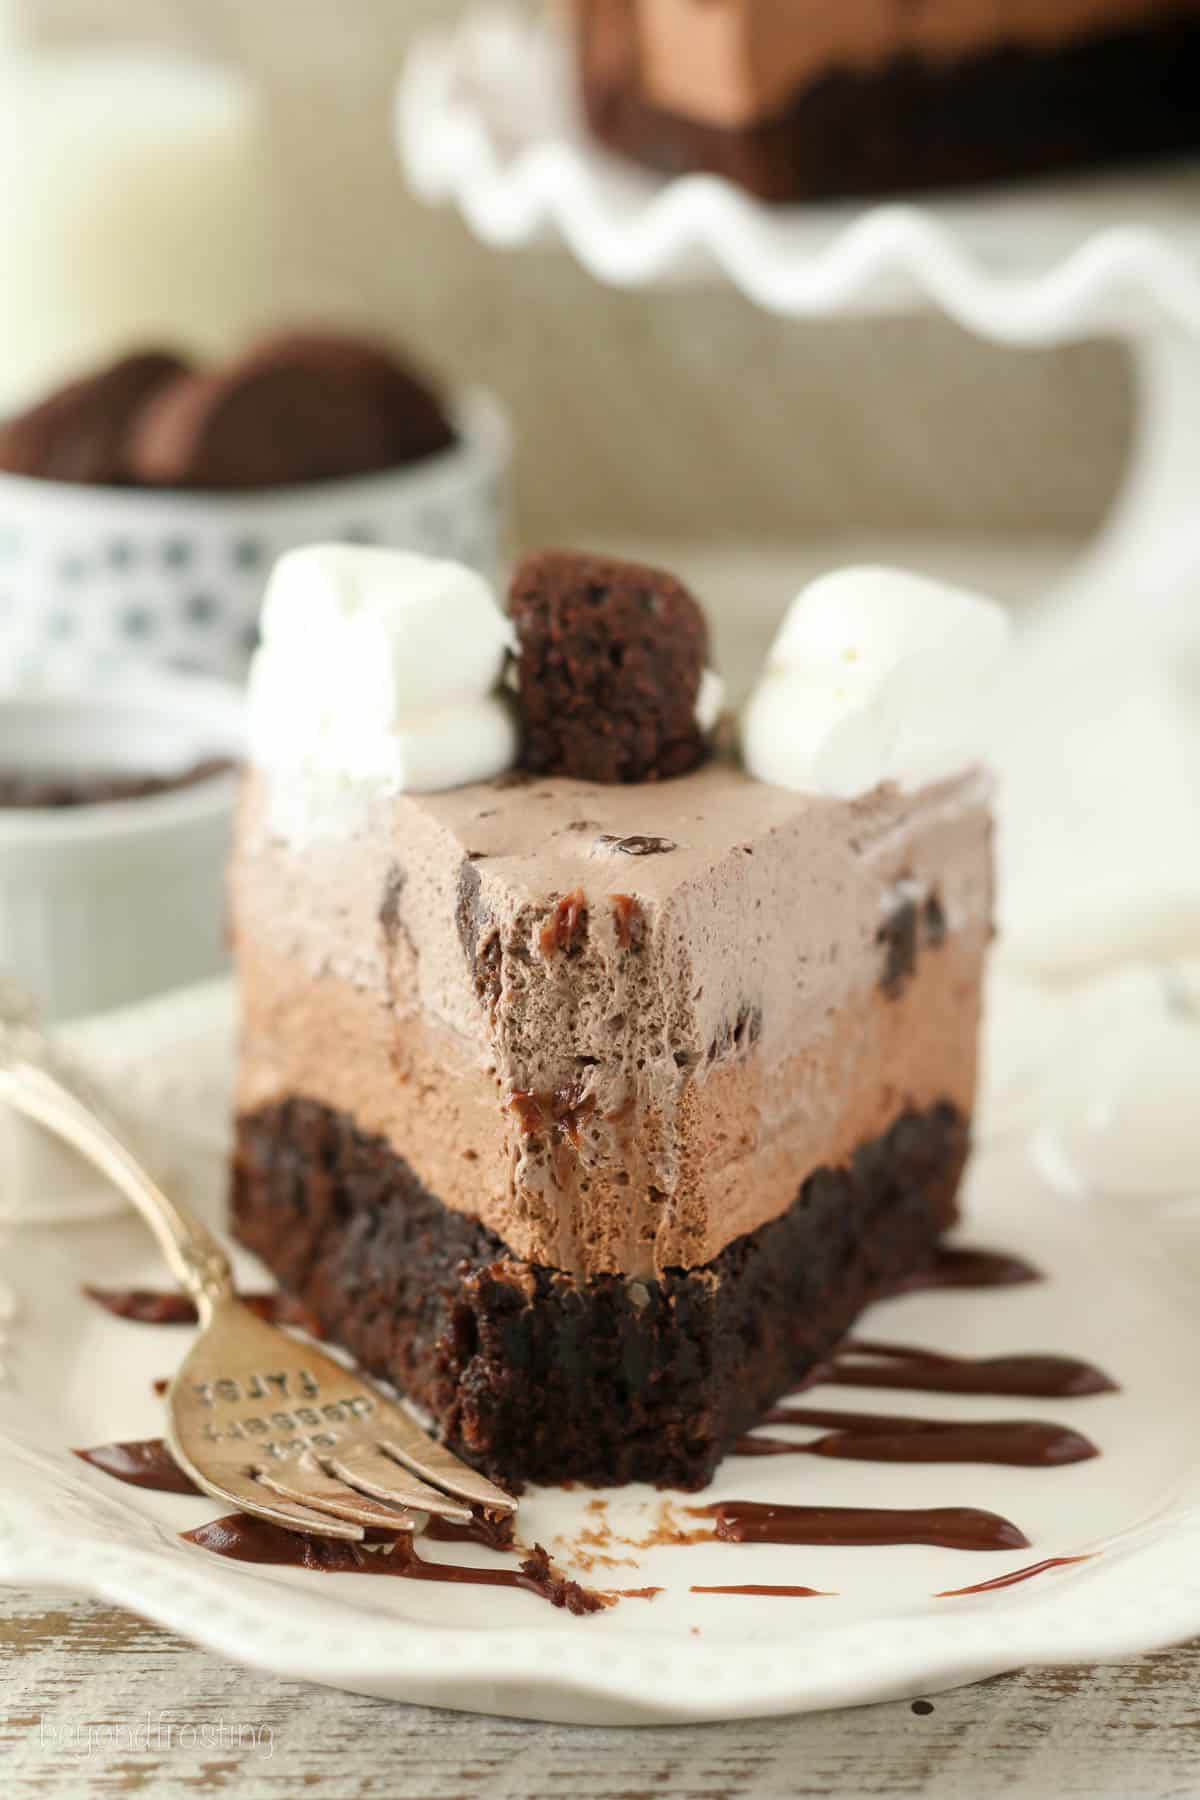 front view of a slice of chocolate mousse cake with a bite taken out.